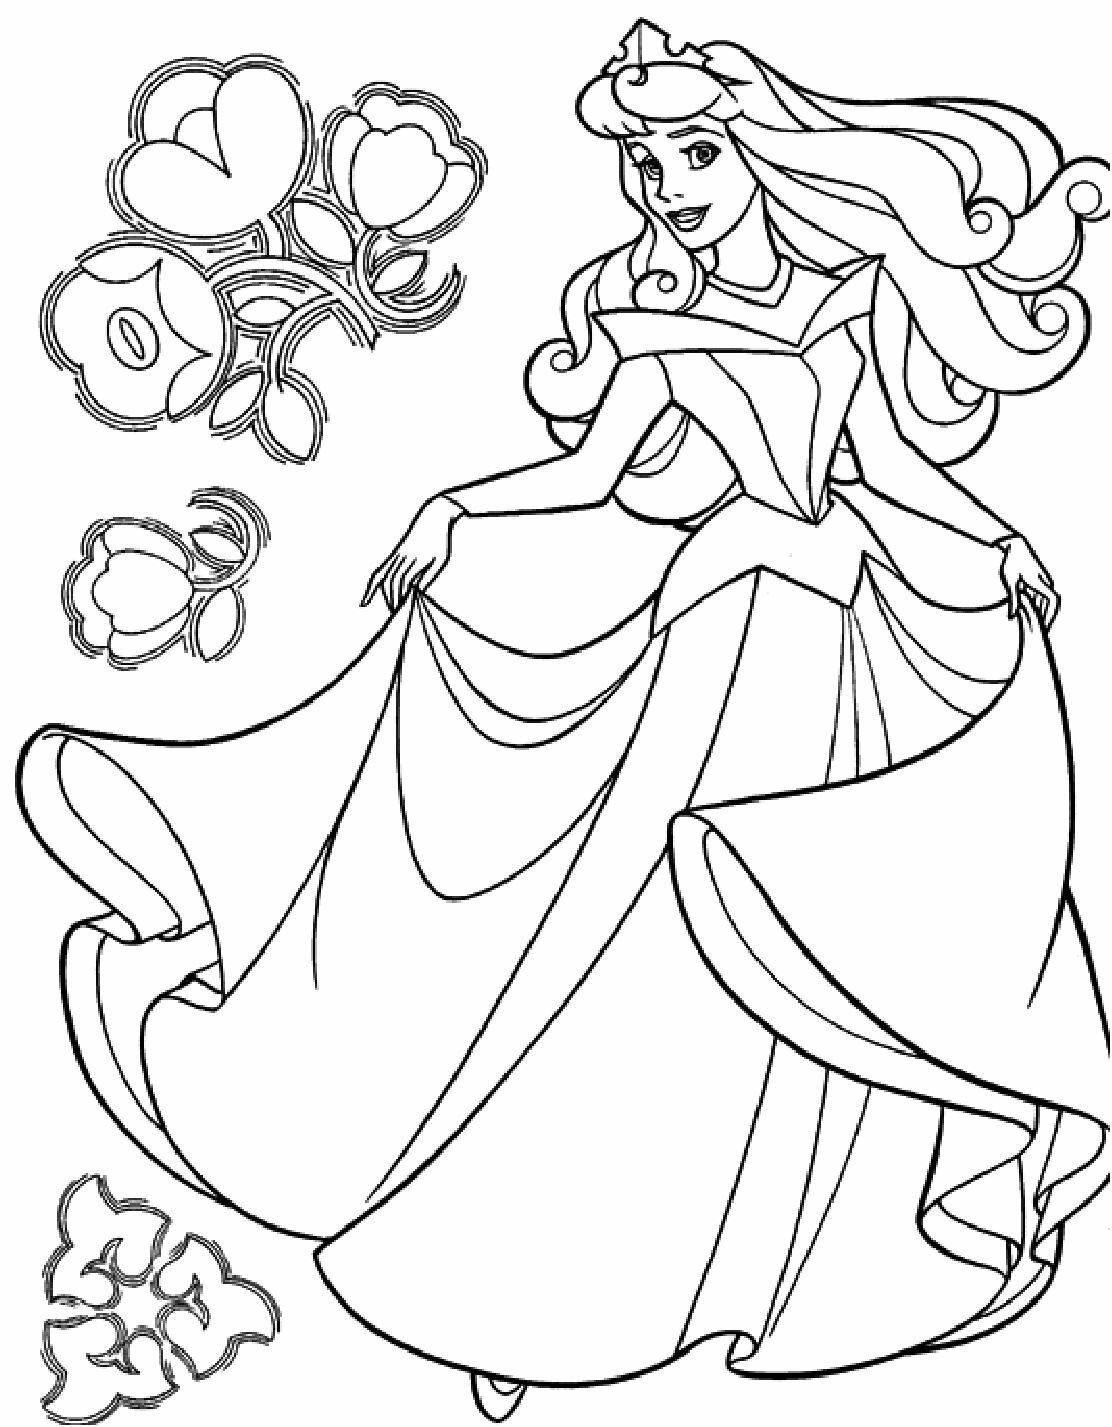 remarkable cinderella coloring pages free printable coloring worksheets 6 contemporary model cinderella coloring pages free to print 